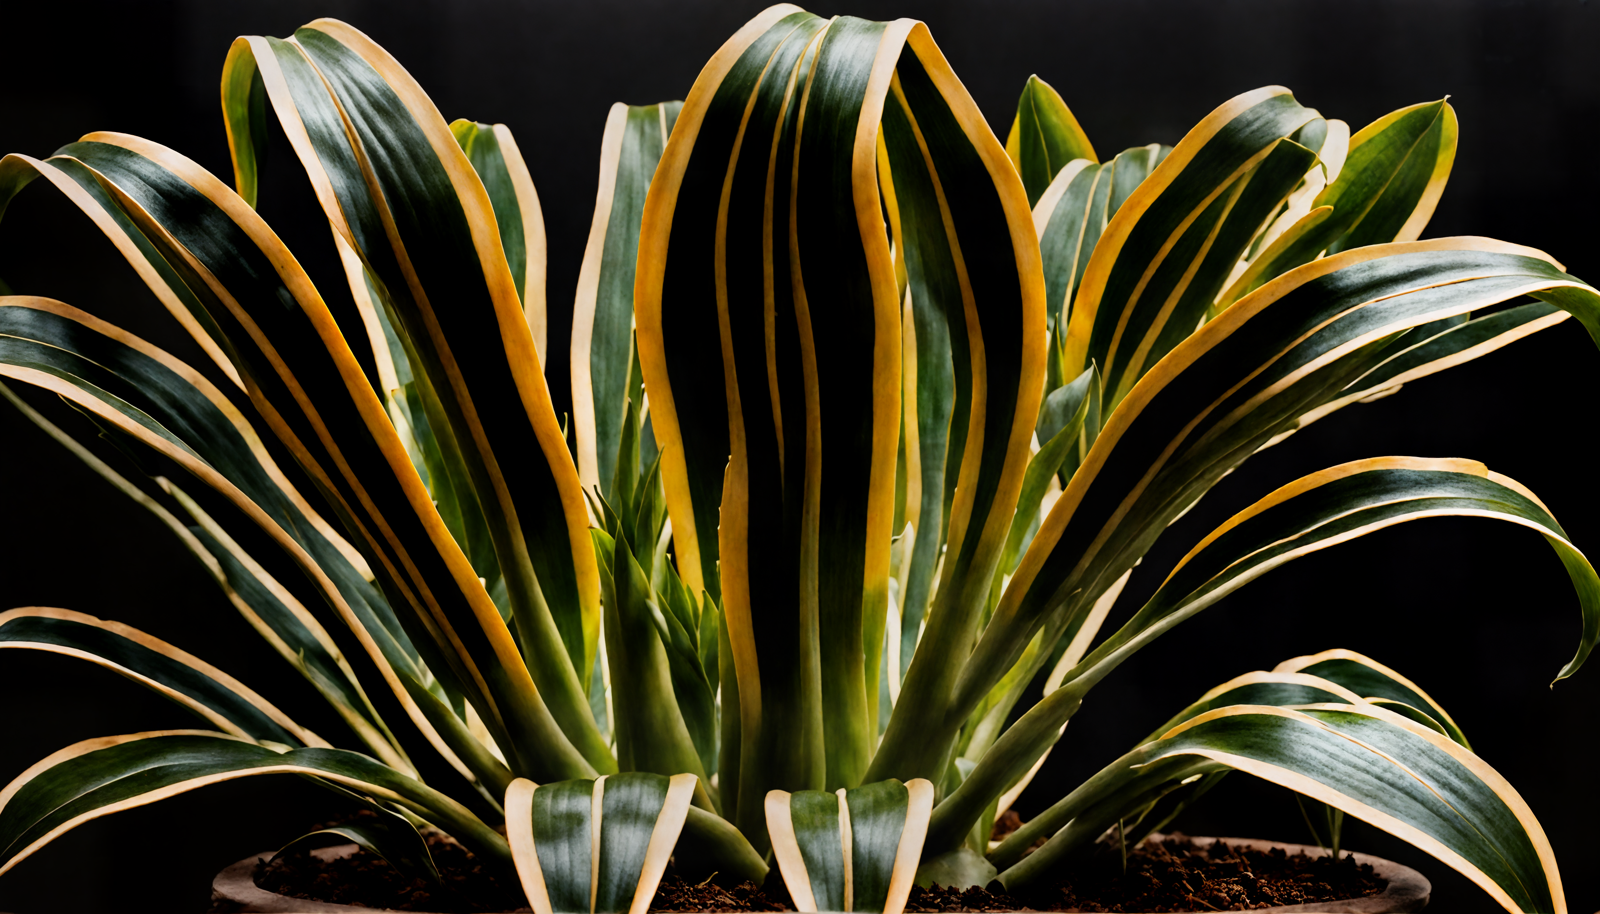 Agave americana in a planter, detailed leaves, indoor setting, clear lighting, against a dark background.